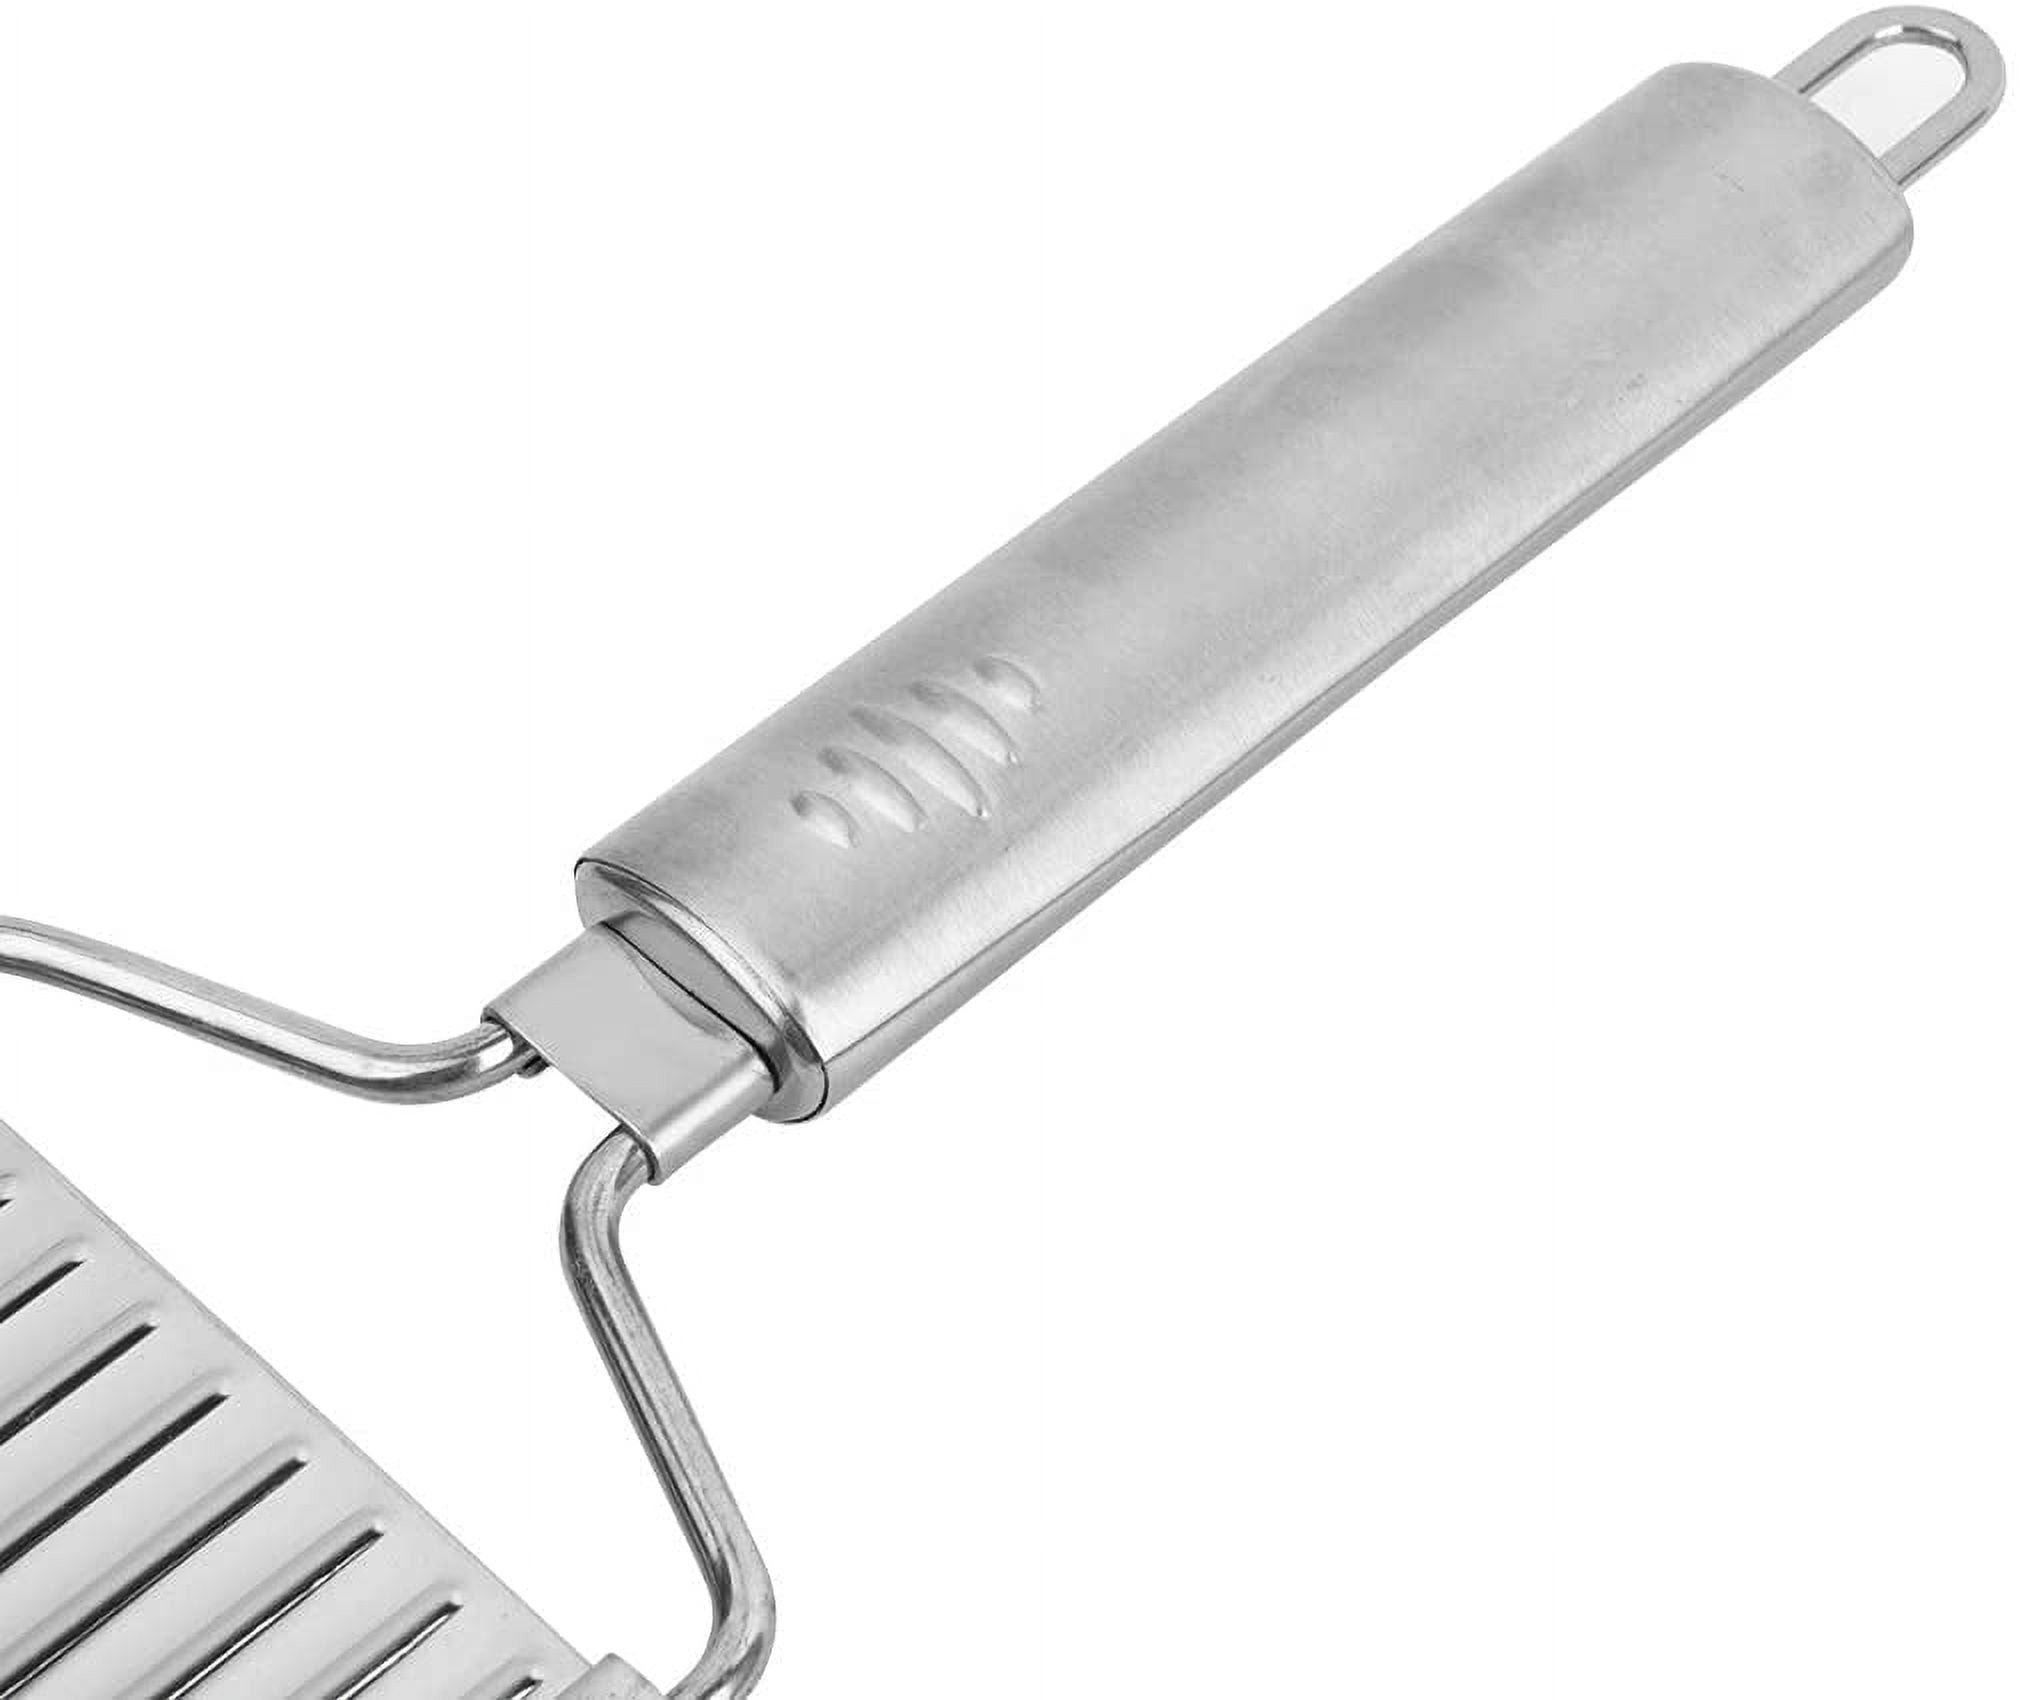 1 X Heavy Duty Stainless Steel Cheese Slicer Cutter Grater Handheld Kitchen  Tool, 1 - Fry's Food Stores